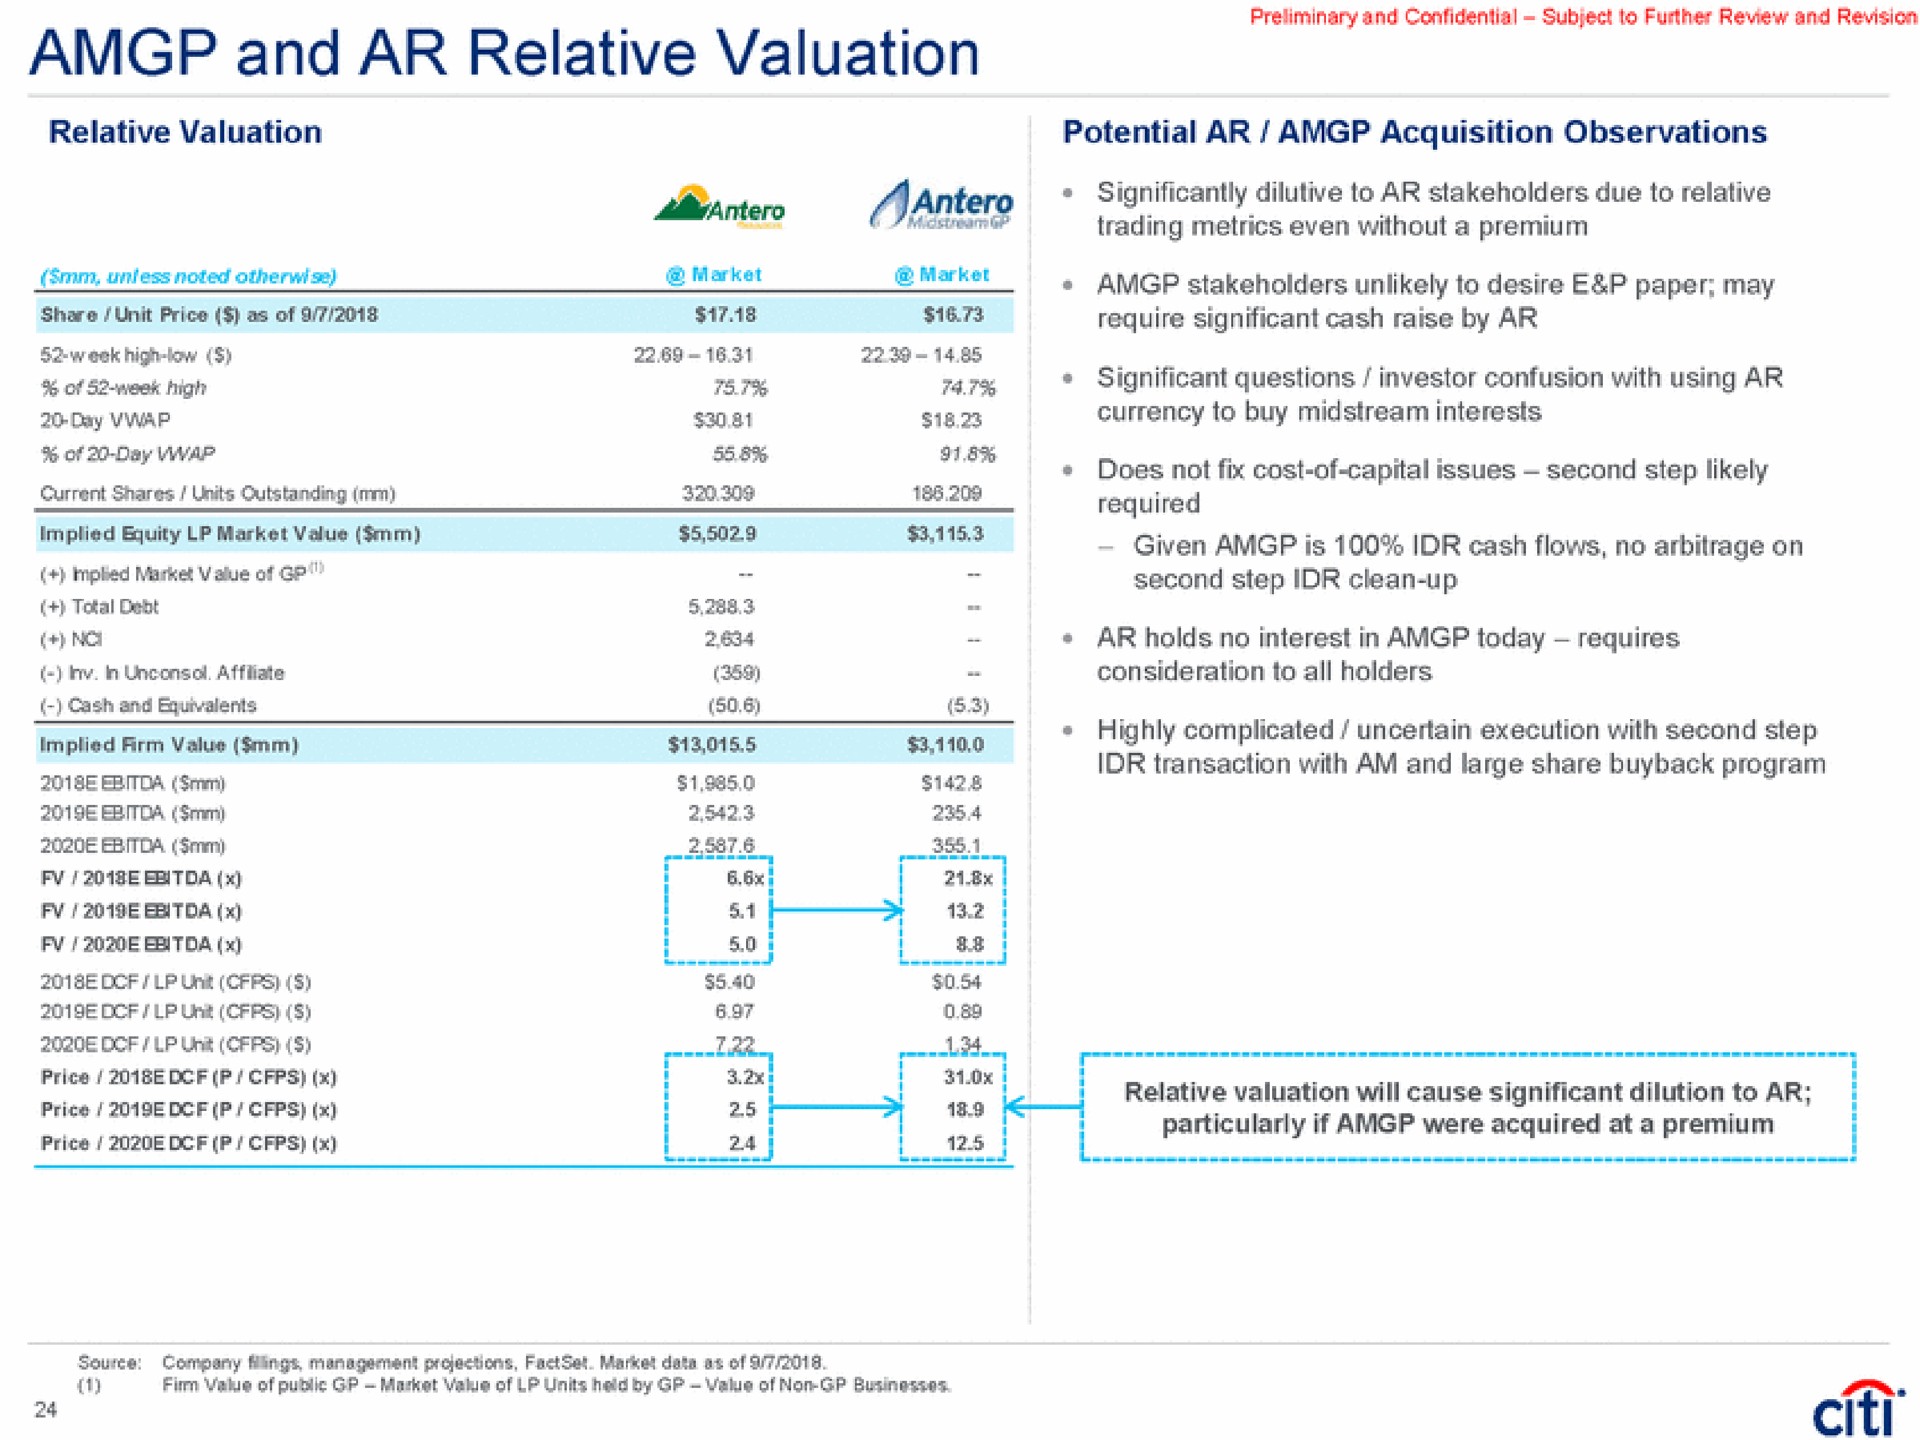 and relative valuation potential acquisition observations price require significant cash raise by i | Citi